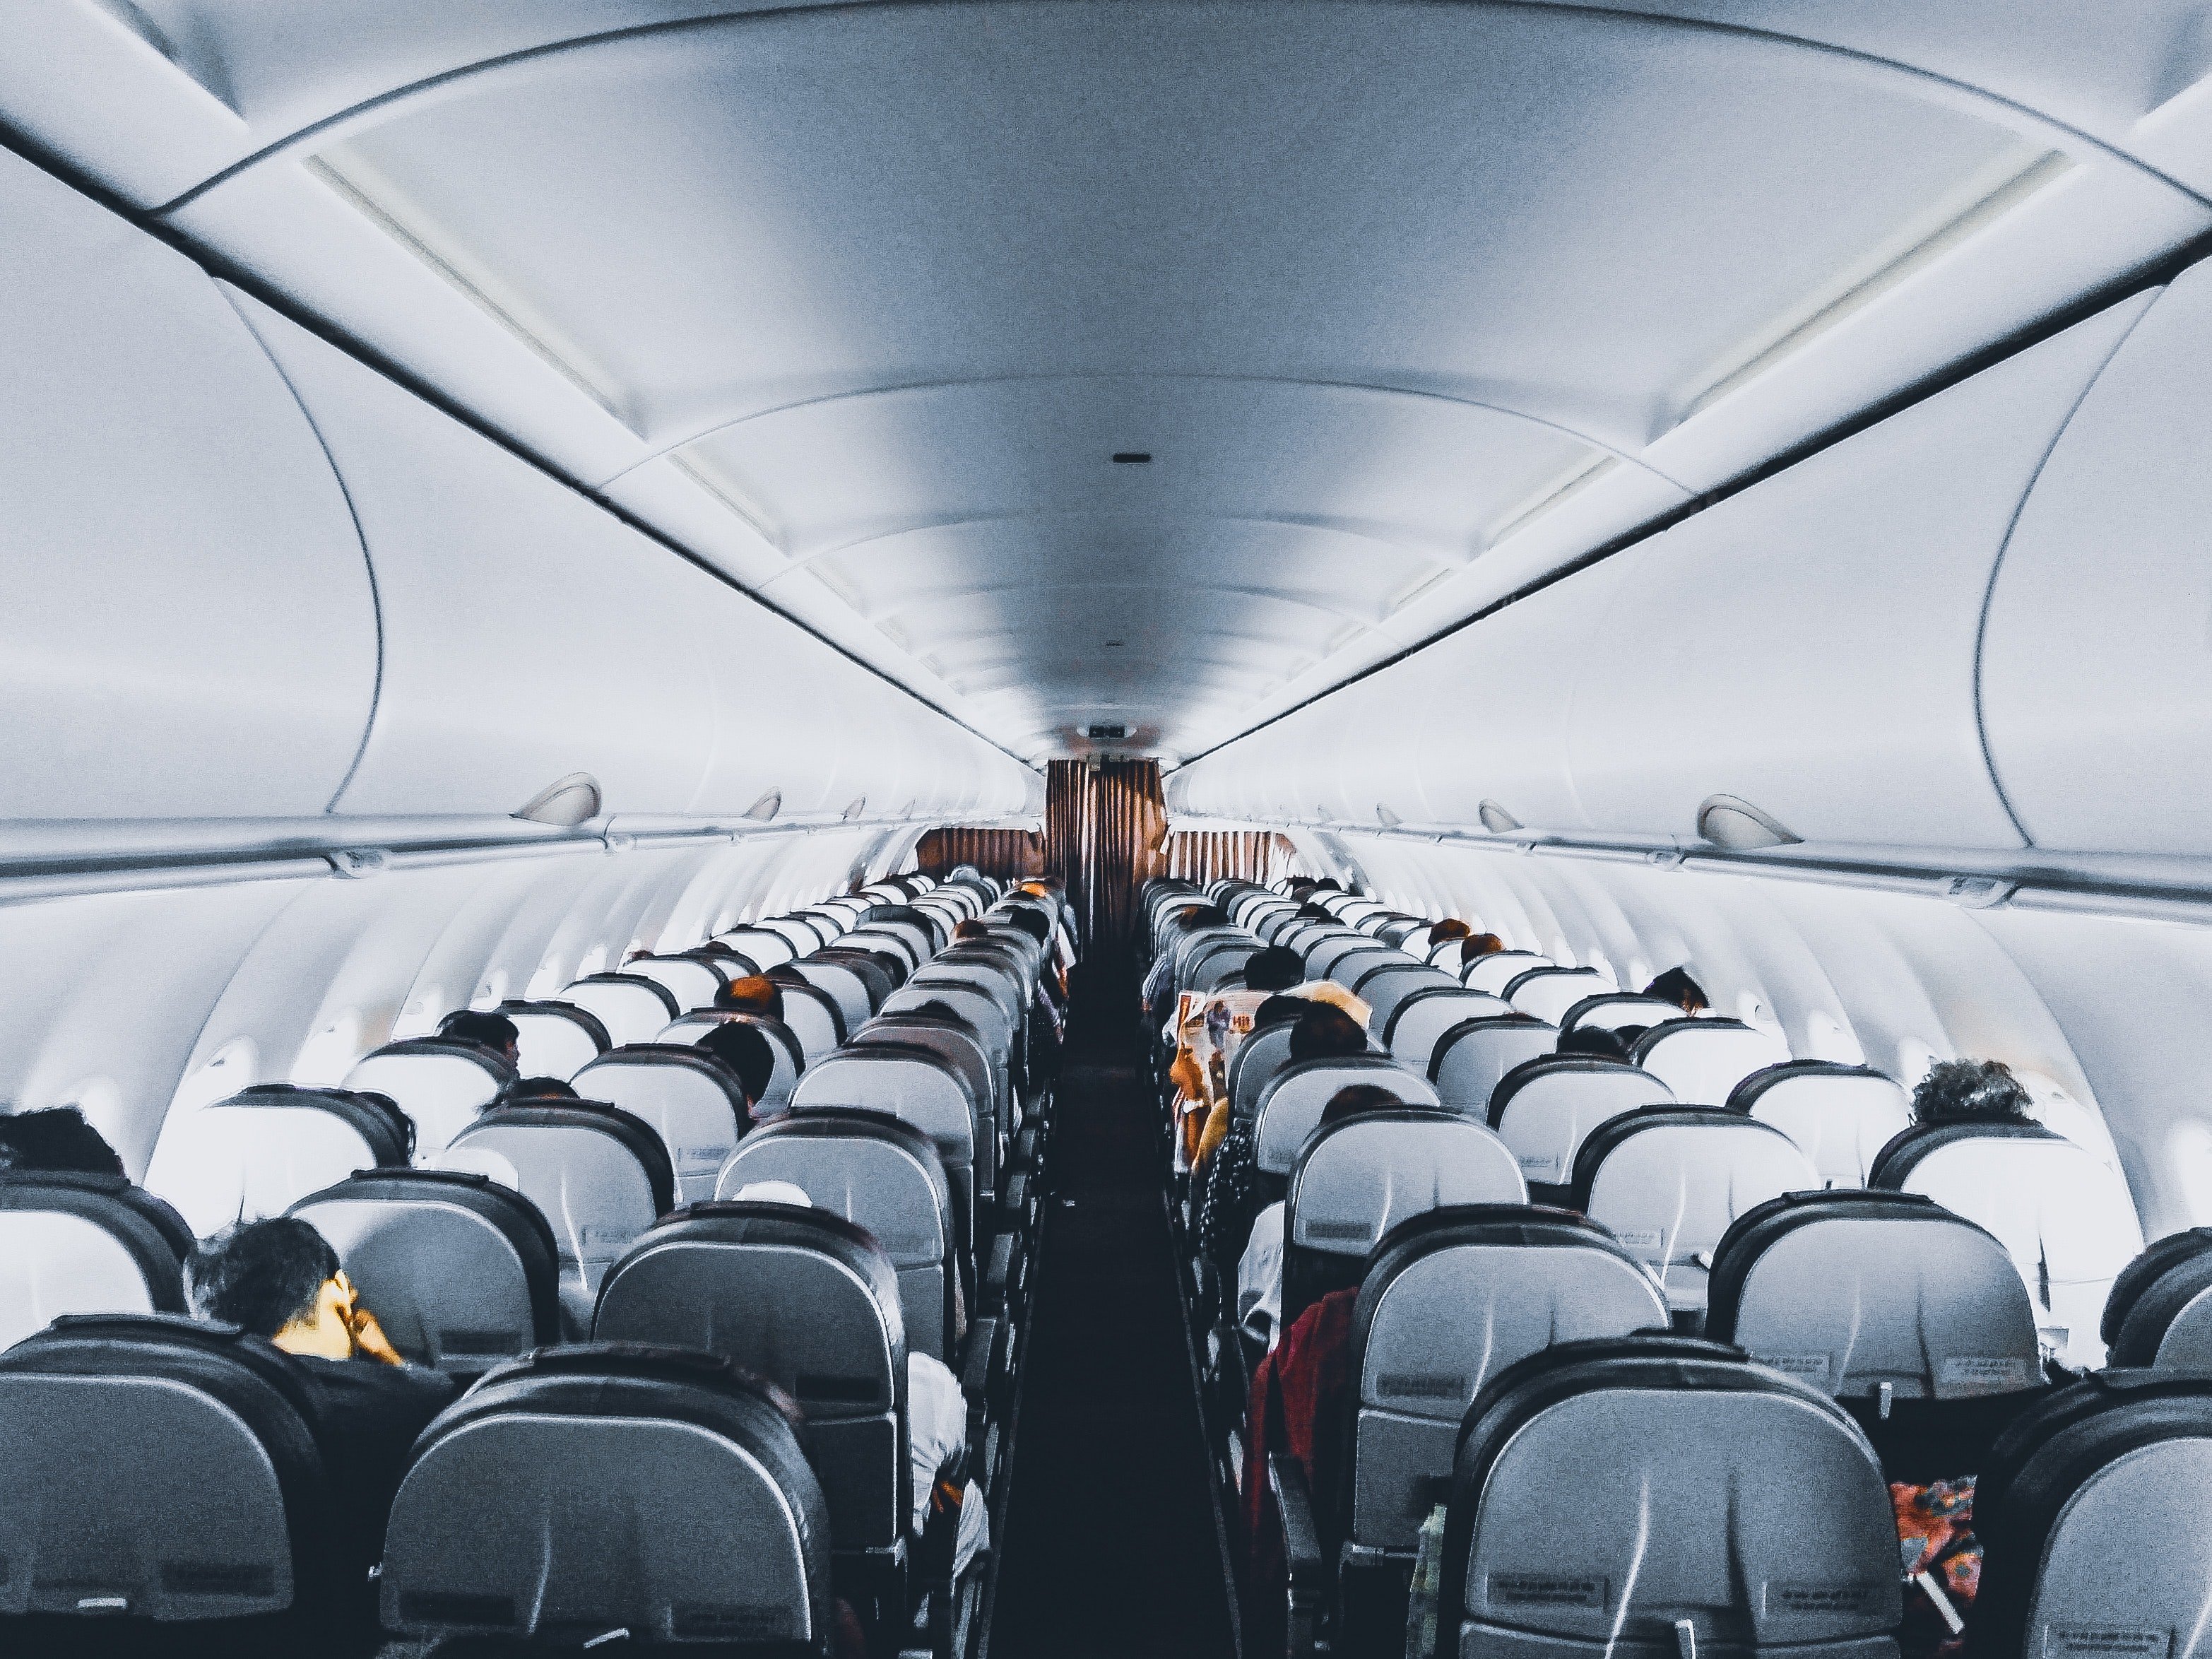 Pictured - People inside a commercial airplane | Source: Pexels